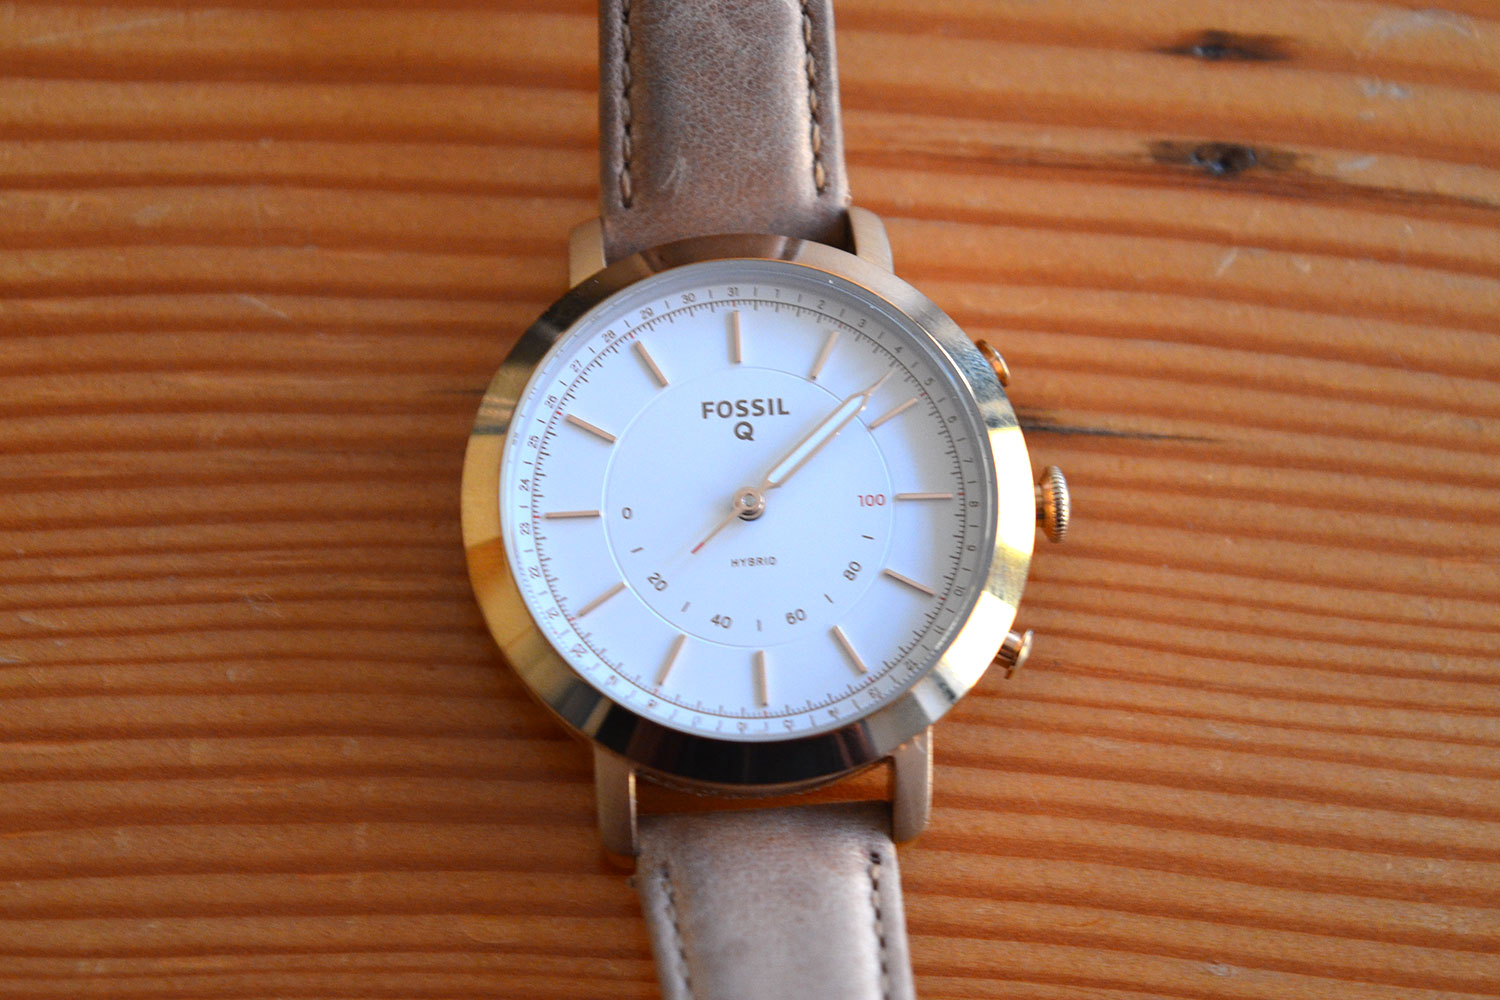 Fossil Q Neely Hybrid review